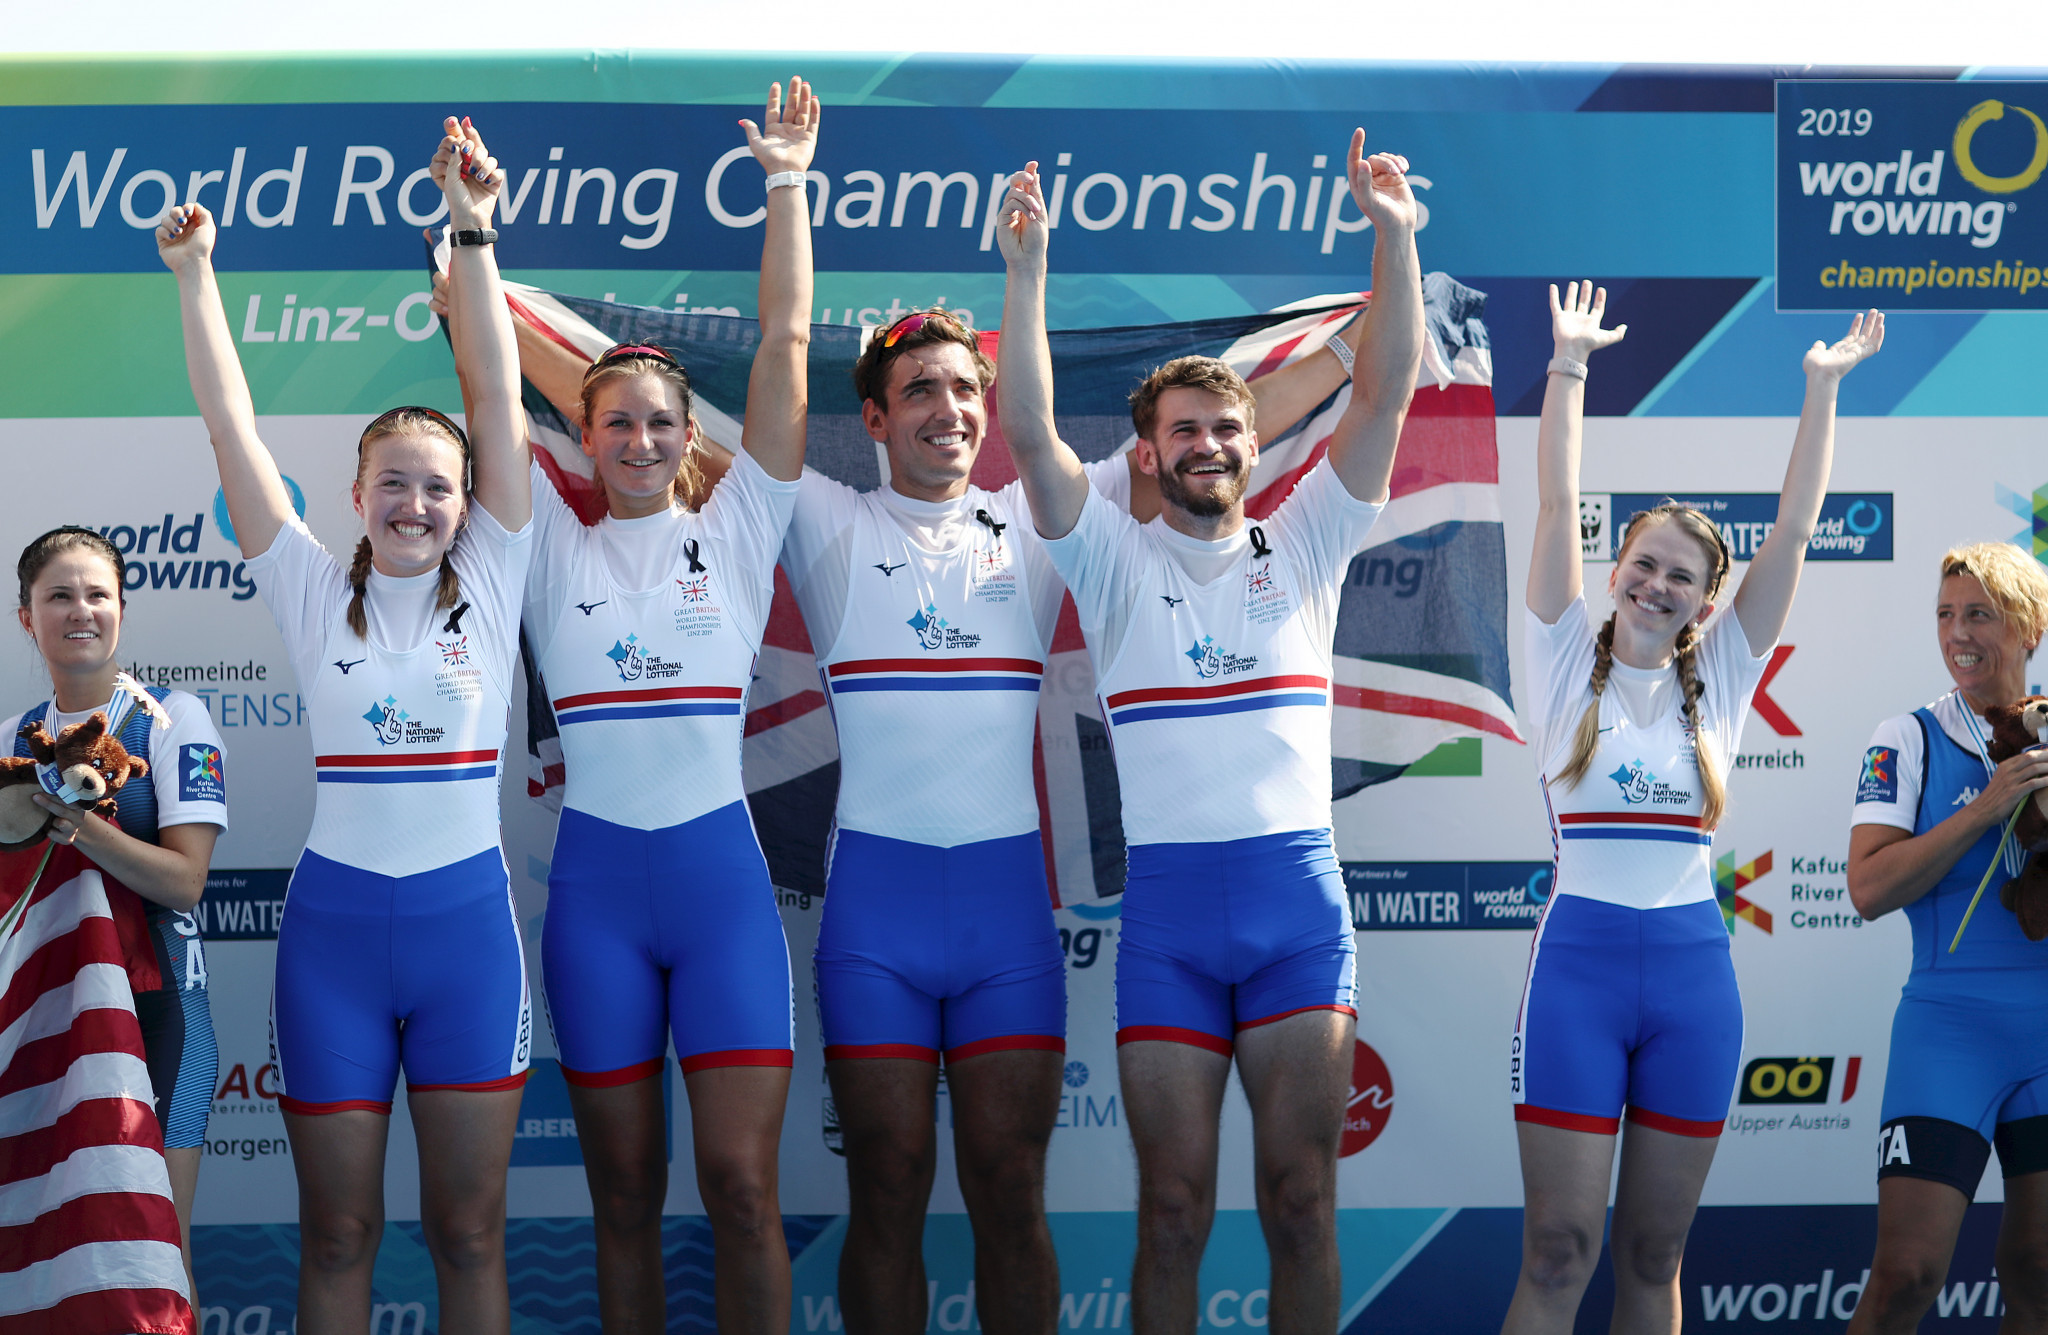 Three World Rowing Championships are included as part of the deal ©Getty Images